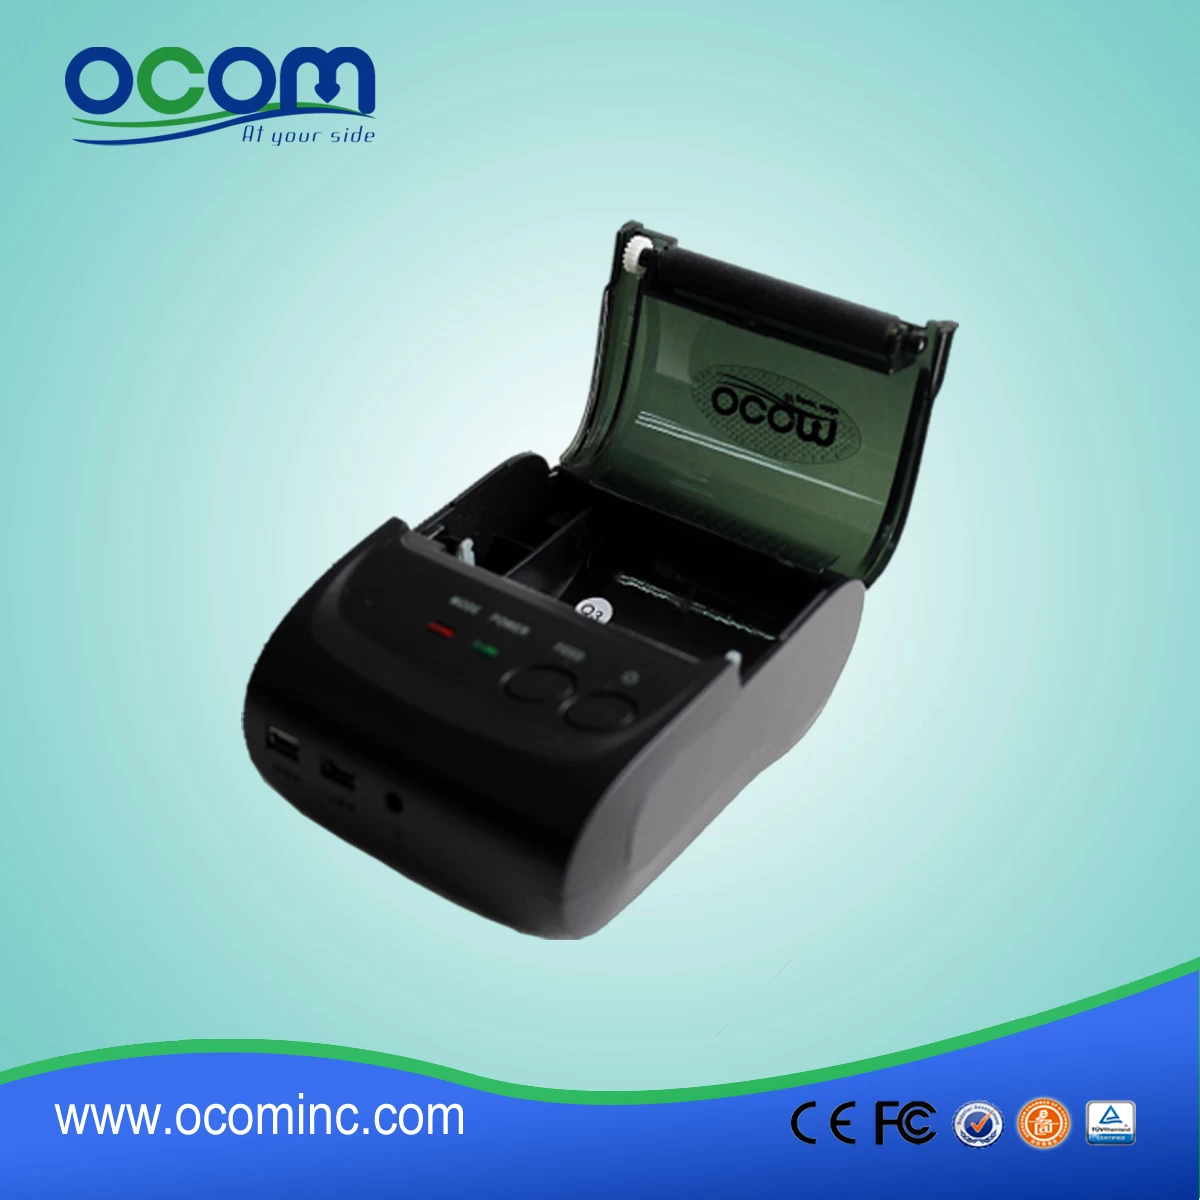 OCPP-M05: 2" Handheld Battery Operated Android Compatible Bluetooth Thermal Printer